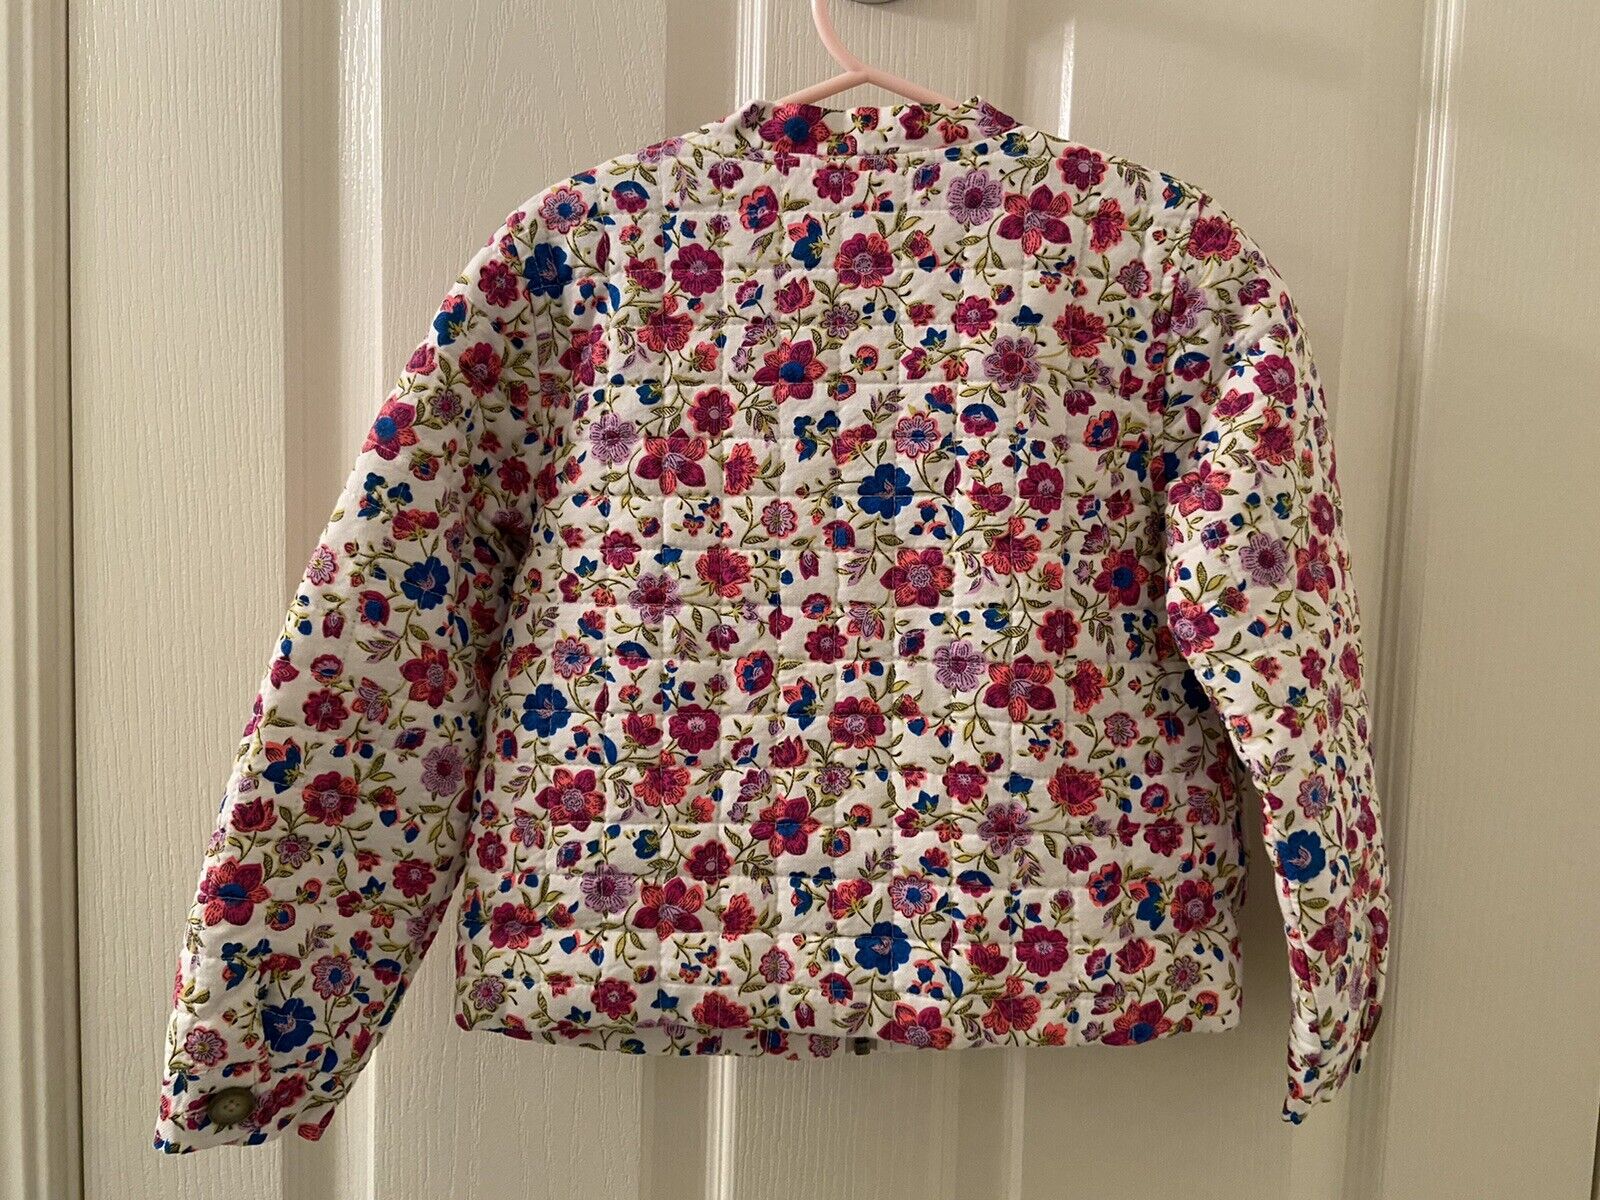 Tea Collection Mercado Rodriguez Floral Quilted Jacket Girls Size Small 4-5 NWT Tea Collection Mercado Rodriguez Jacket - фотография #7